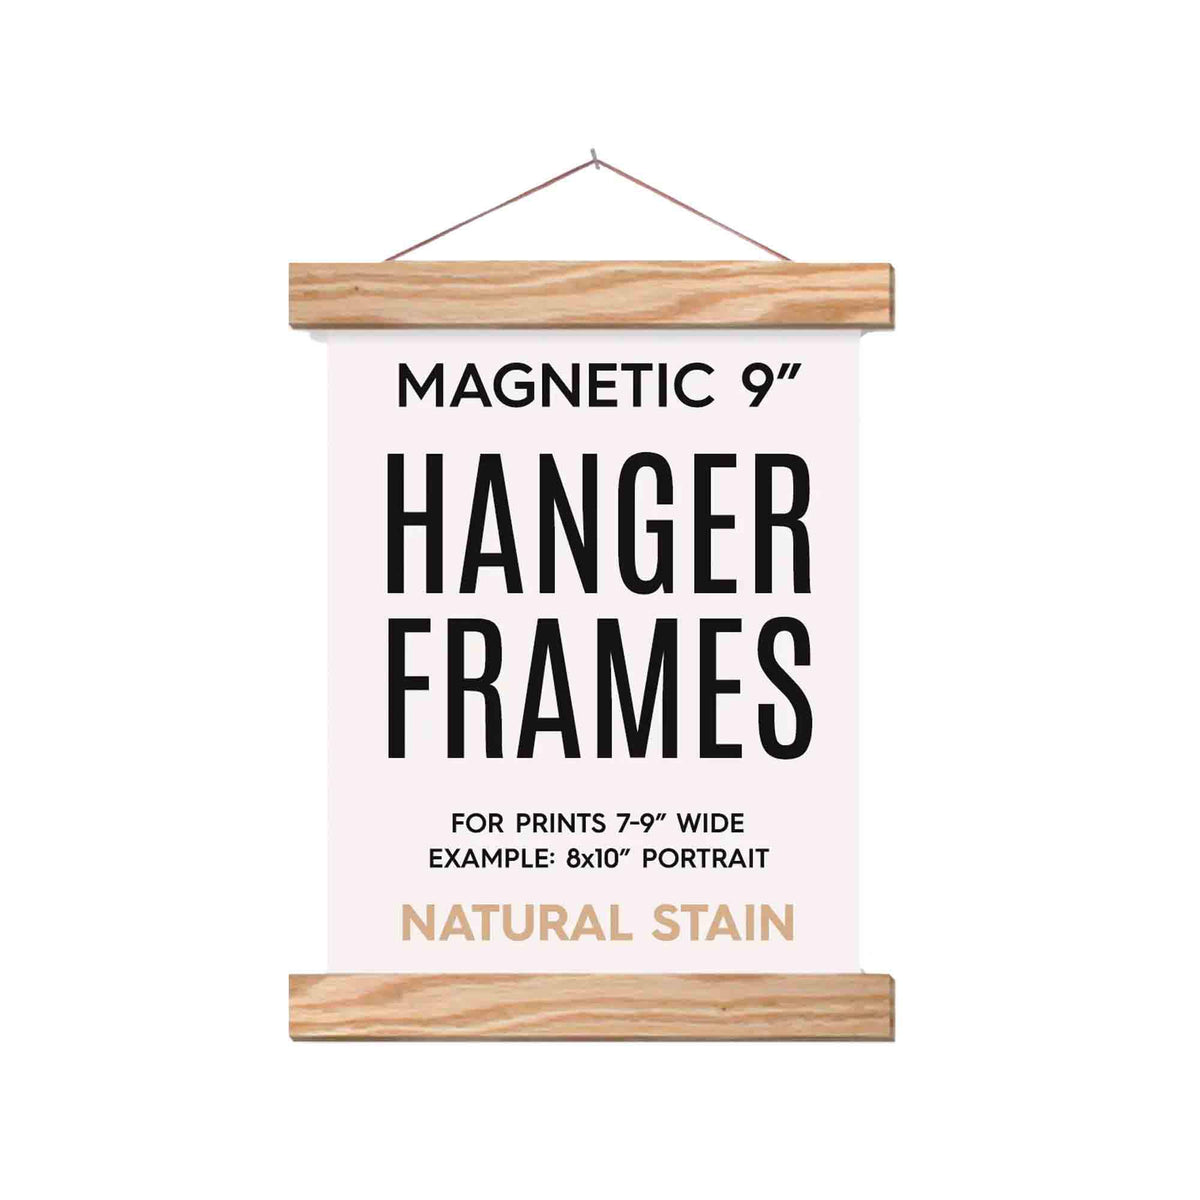 https://www.thehandmadeshowroom.shop/wp-content/uploads/1699/52/frame-9in-magnetic-hanger-frame-assorted-colors-by-hanger-frames-hanger-frames-sale-online-its-a-great-price-for-the-your-money_1.jpg